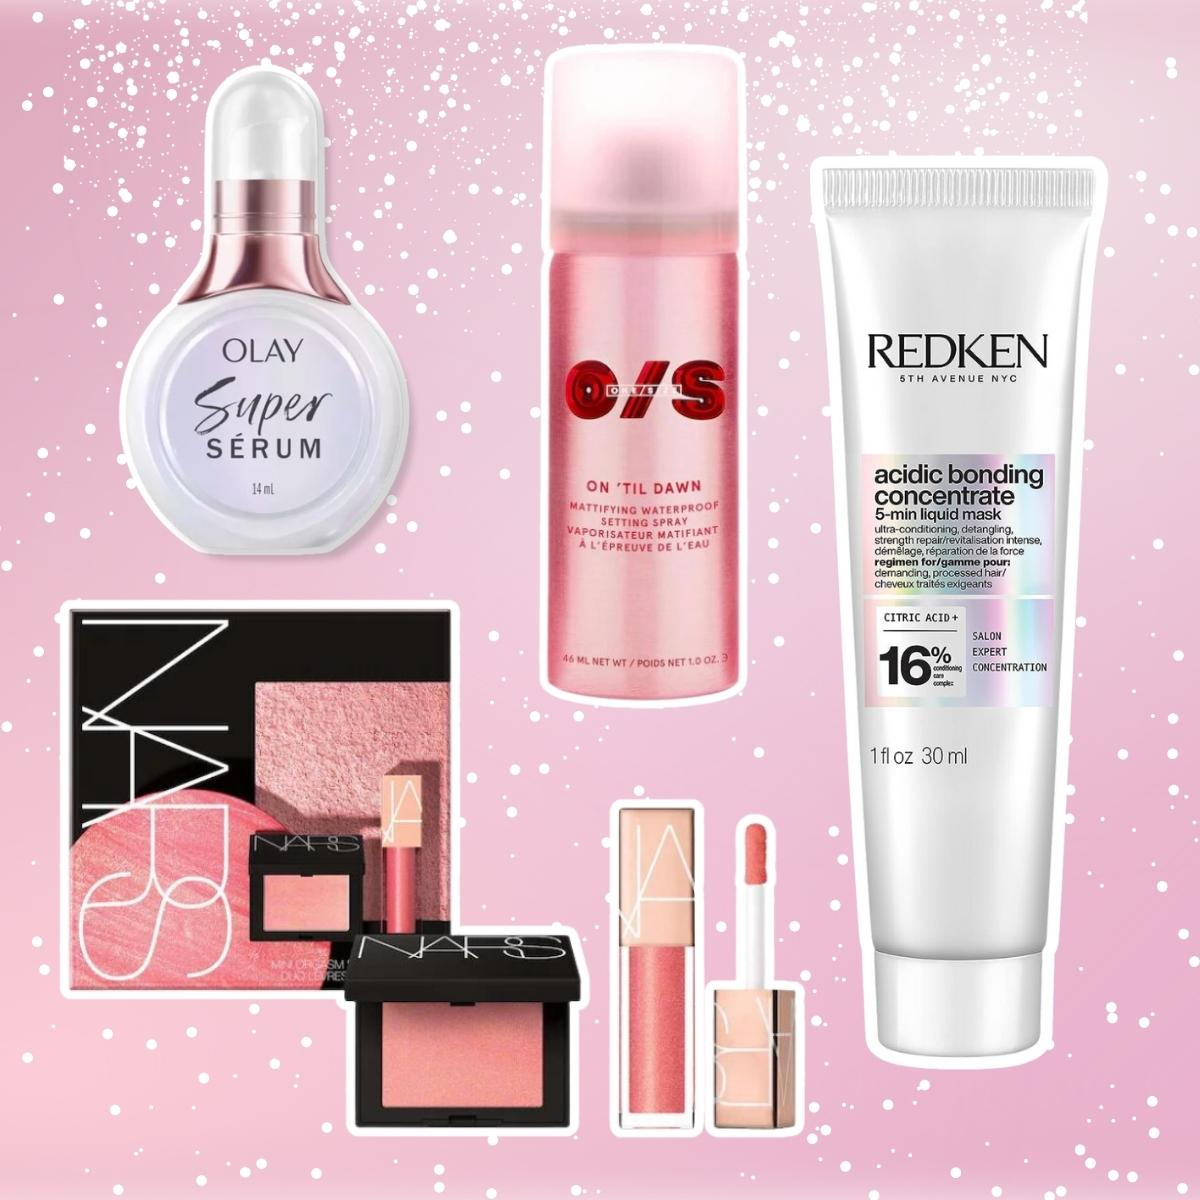 Pink stuff • Compare (30 products) find best prices »